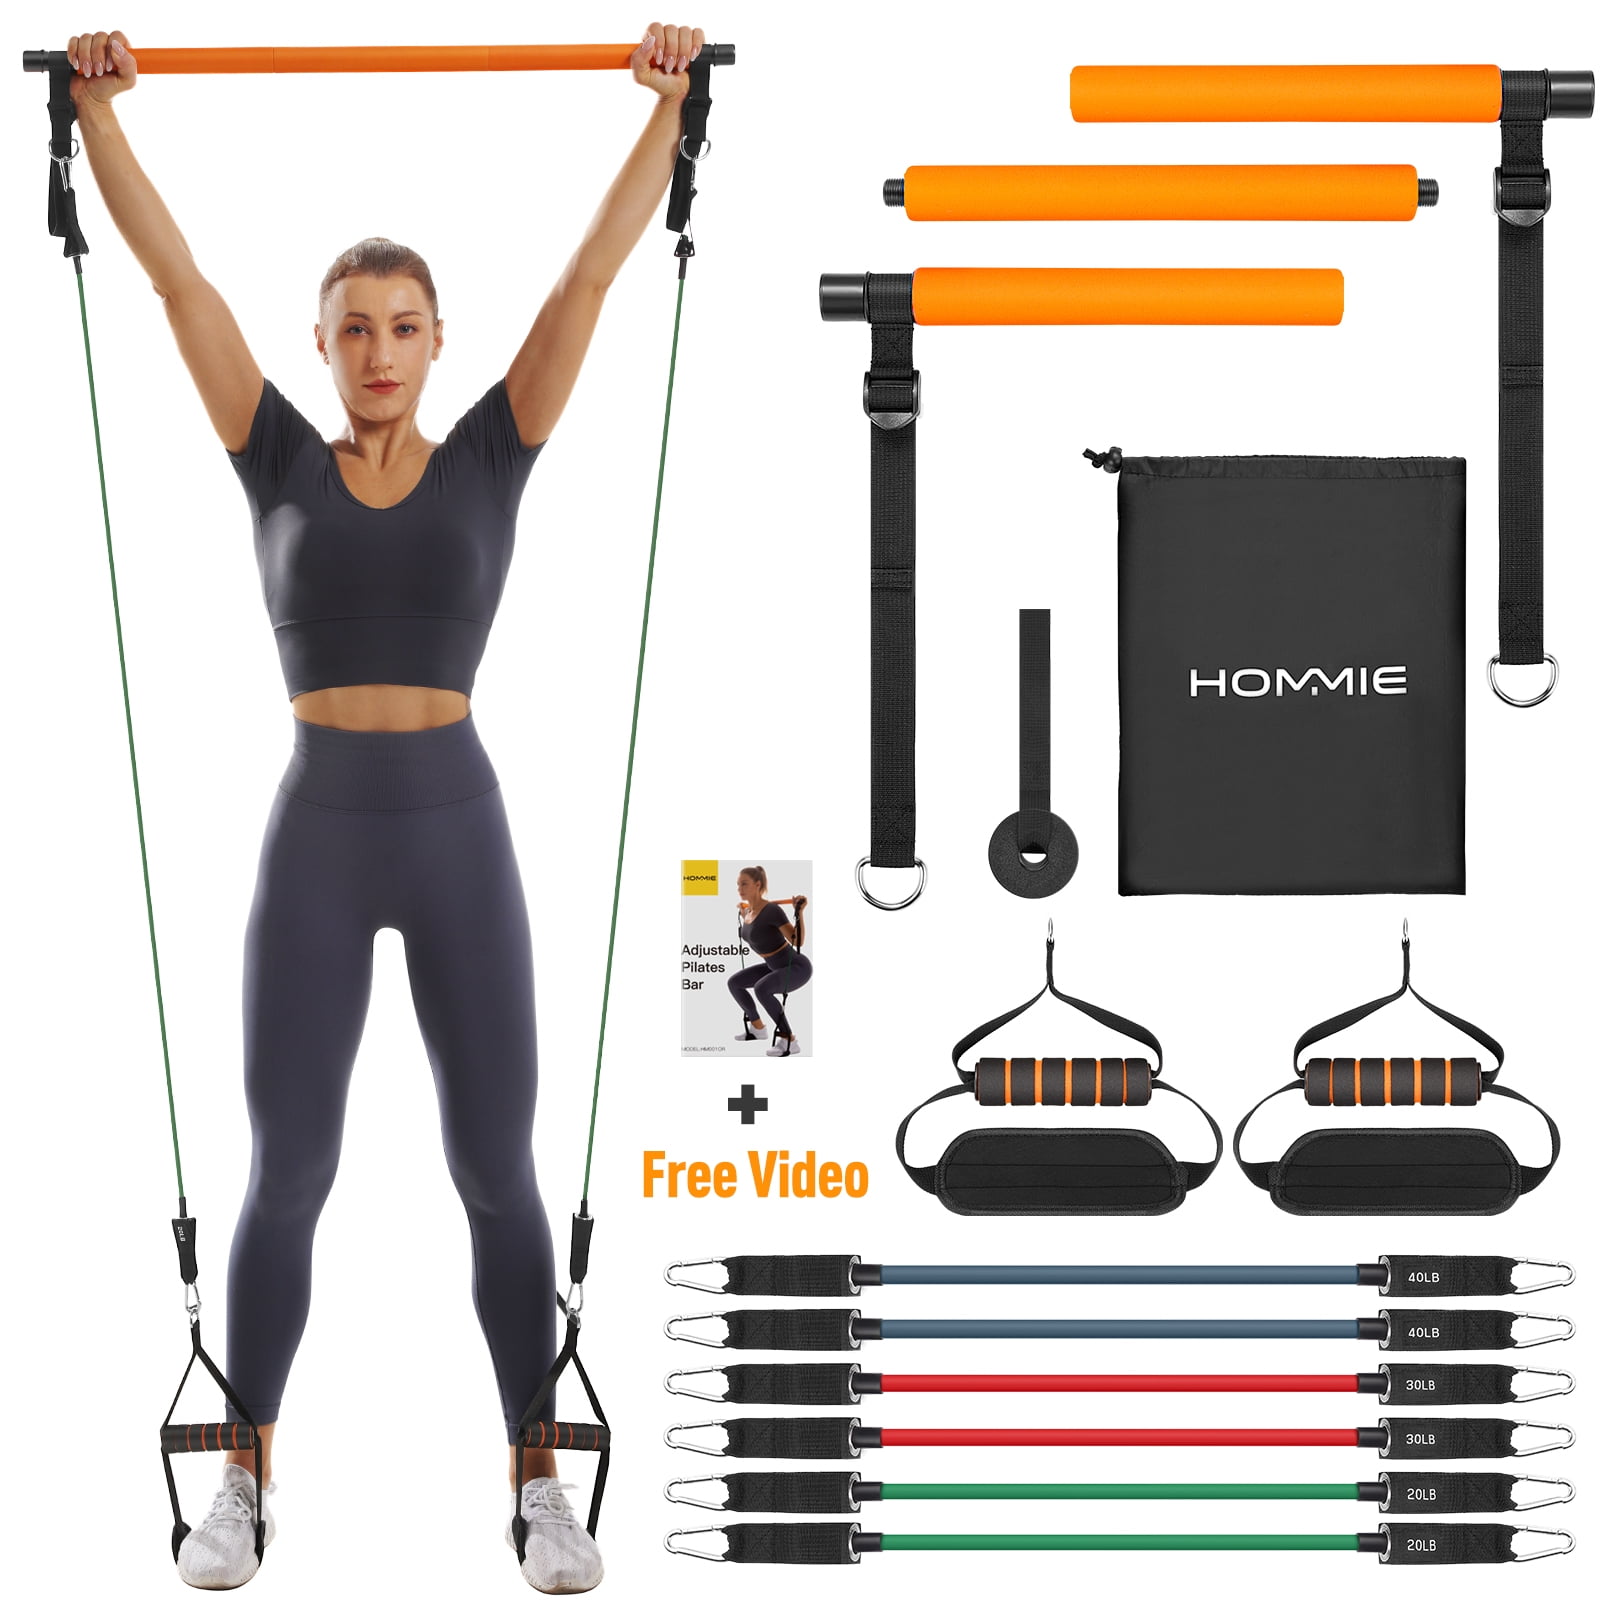  FITI DARE Multifunctional Pilates Bar Kit with Resistance  Bands (25,30,35lb) and Videos, Portable Workout Equipment Home Gym for  Women & Men of All Heights